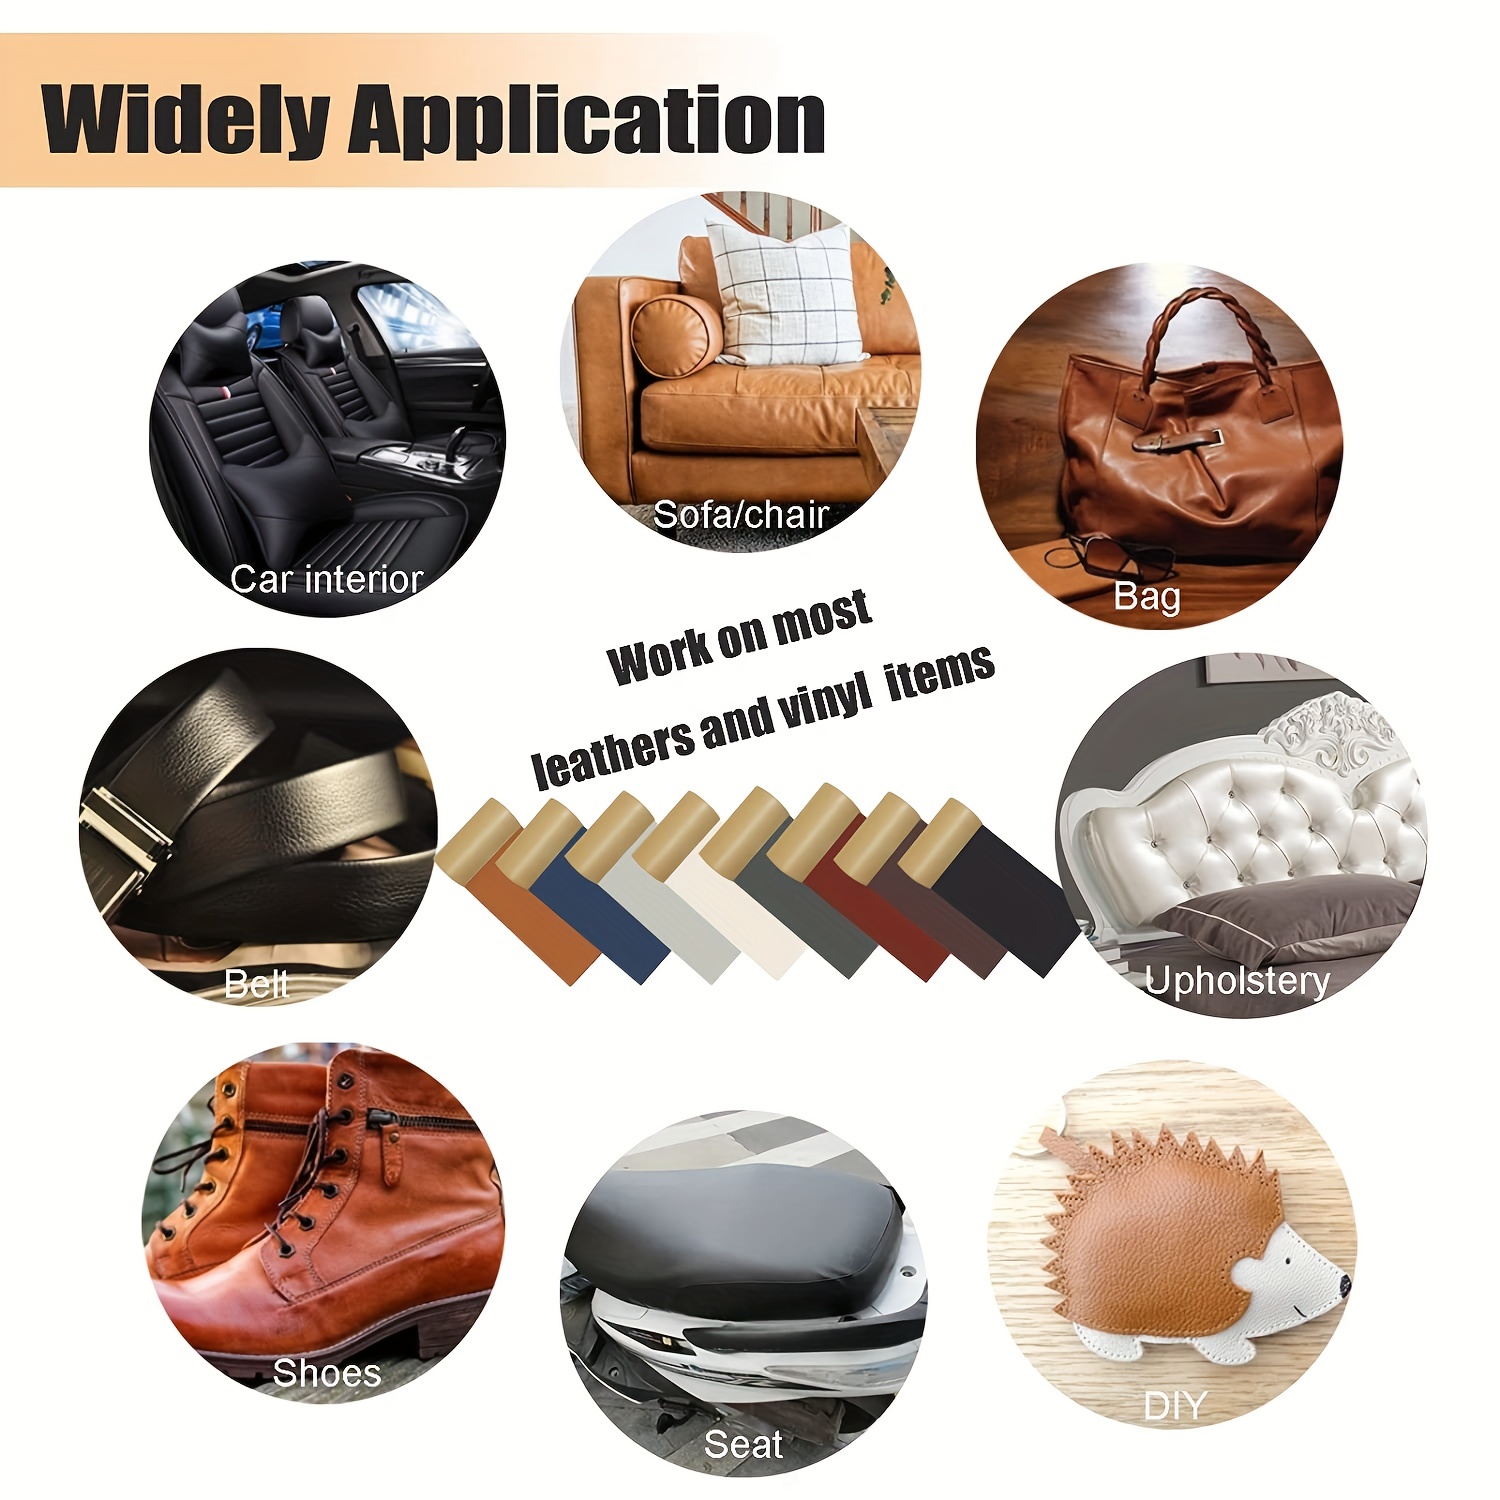 Leather Repair Tape Patch Leather Adhesive for Sofas, Car Seats, Handbags,  Jackets, Couches, Furniture, Kitchen Cabinets, DIY